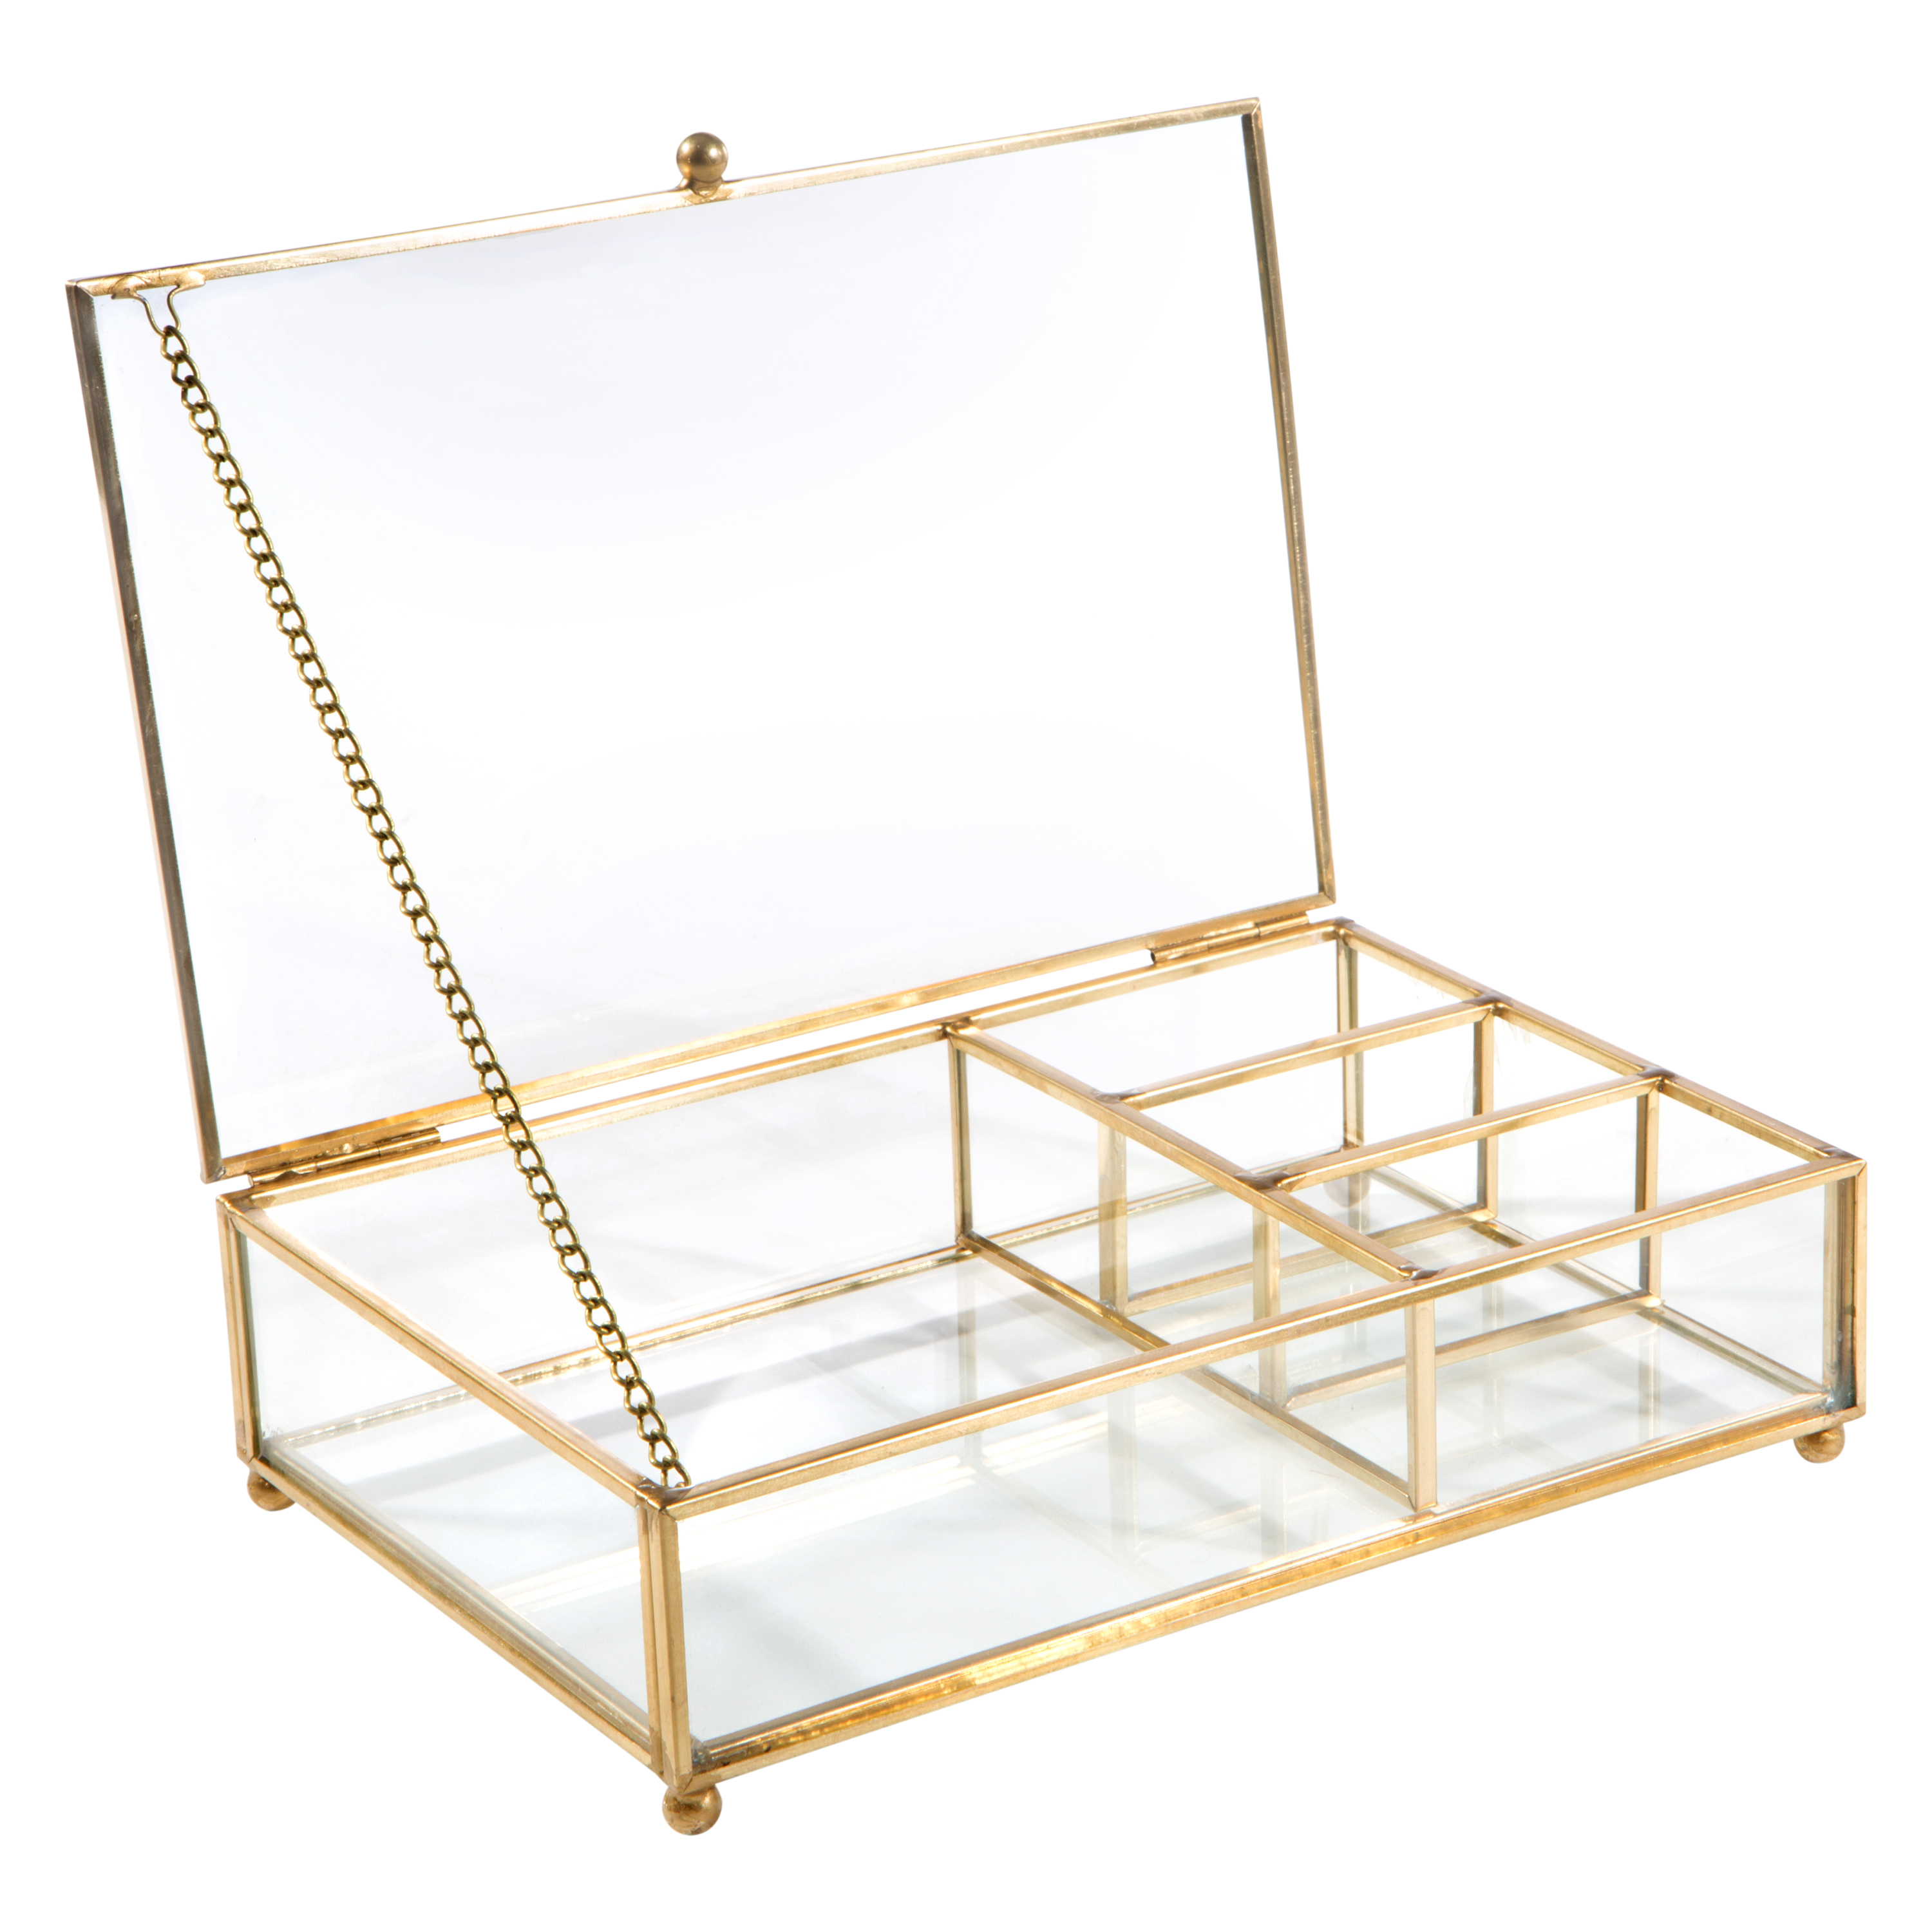 Home Details Vintage 4 Compartment Glass Unisex Cosmetic & Jewelry Keepsake Box in Gold - image 2 of 4